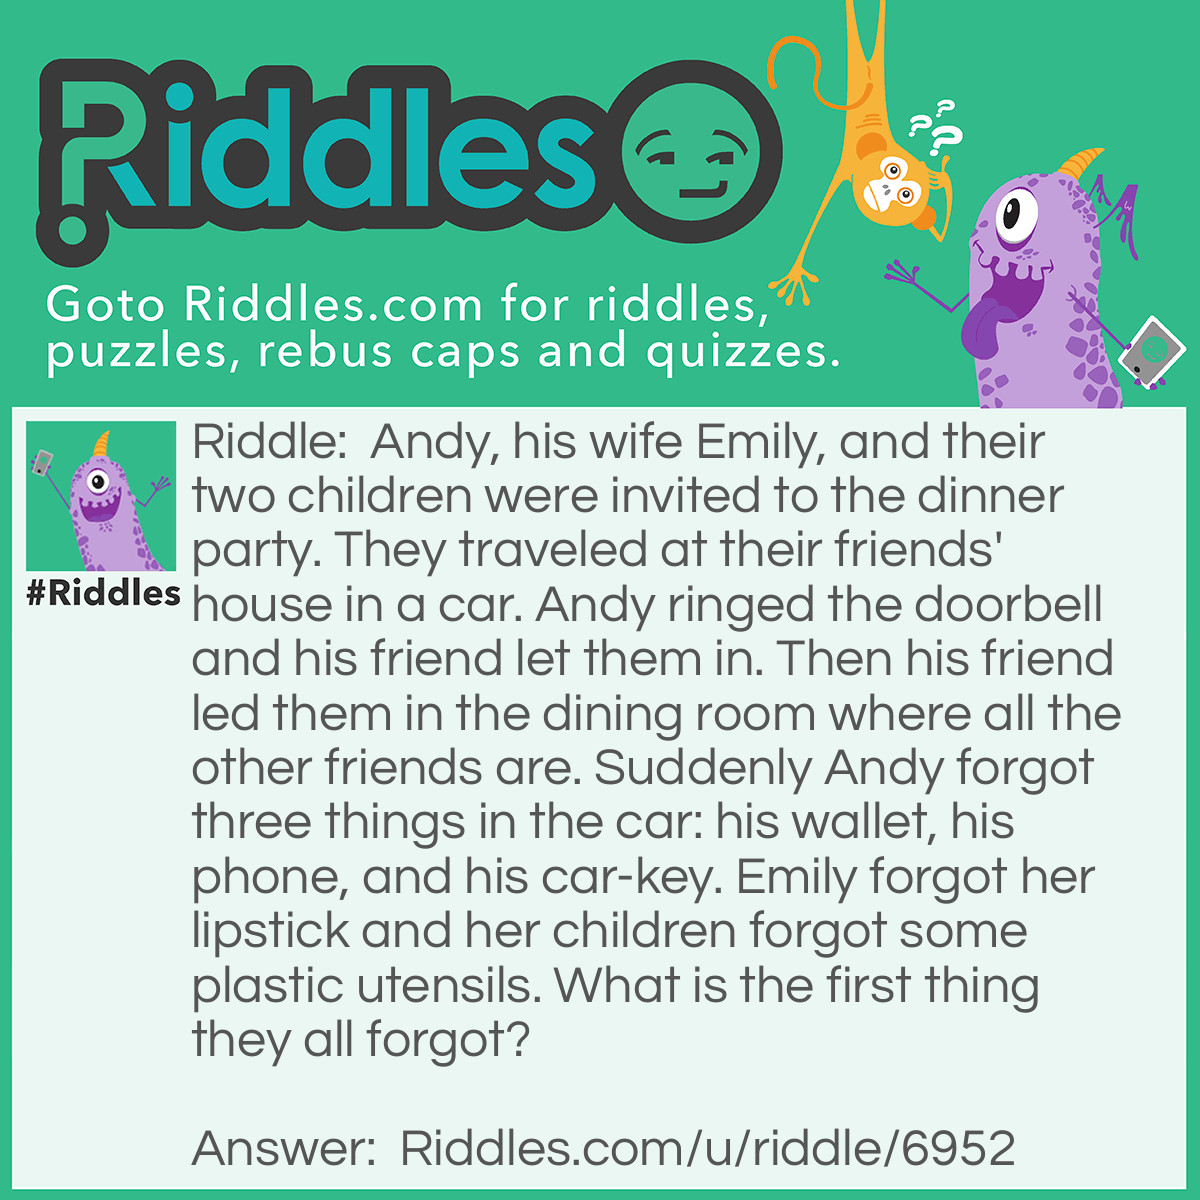 Riddle: Andy, his wife Emily, and their two children were invited to the dinner party. They traveled at their friends' house in a car. Andy ringed the doorbell and his friend let them in. Then his friend led them in the dining room where all the other friends are. Suddenly Andy forgot three things in the car: his wallet, his phone, and his car-key. Emily forgot her lipstick and her children forgot some plastic utensils. What is the first thing they all forgot? Answer: Their manners. When Andy's friend let them inside, they didn't say anything to his friend.